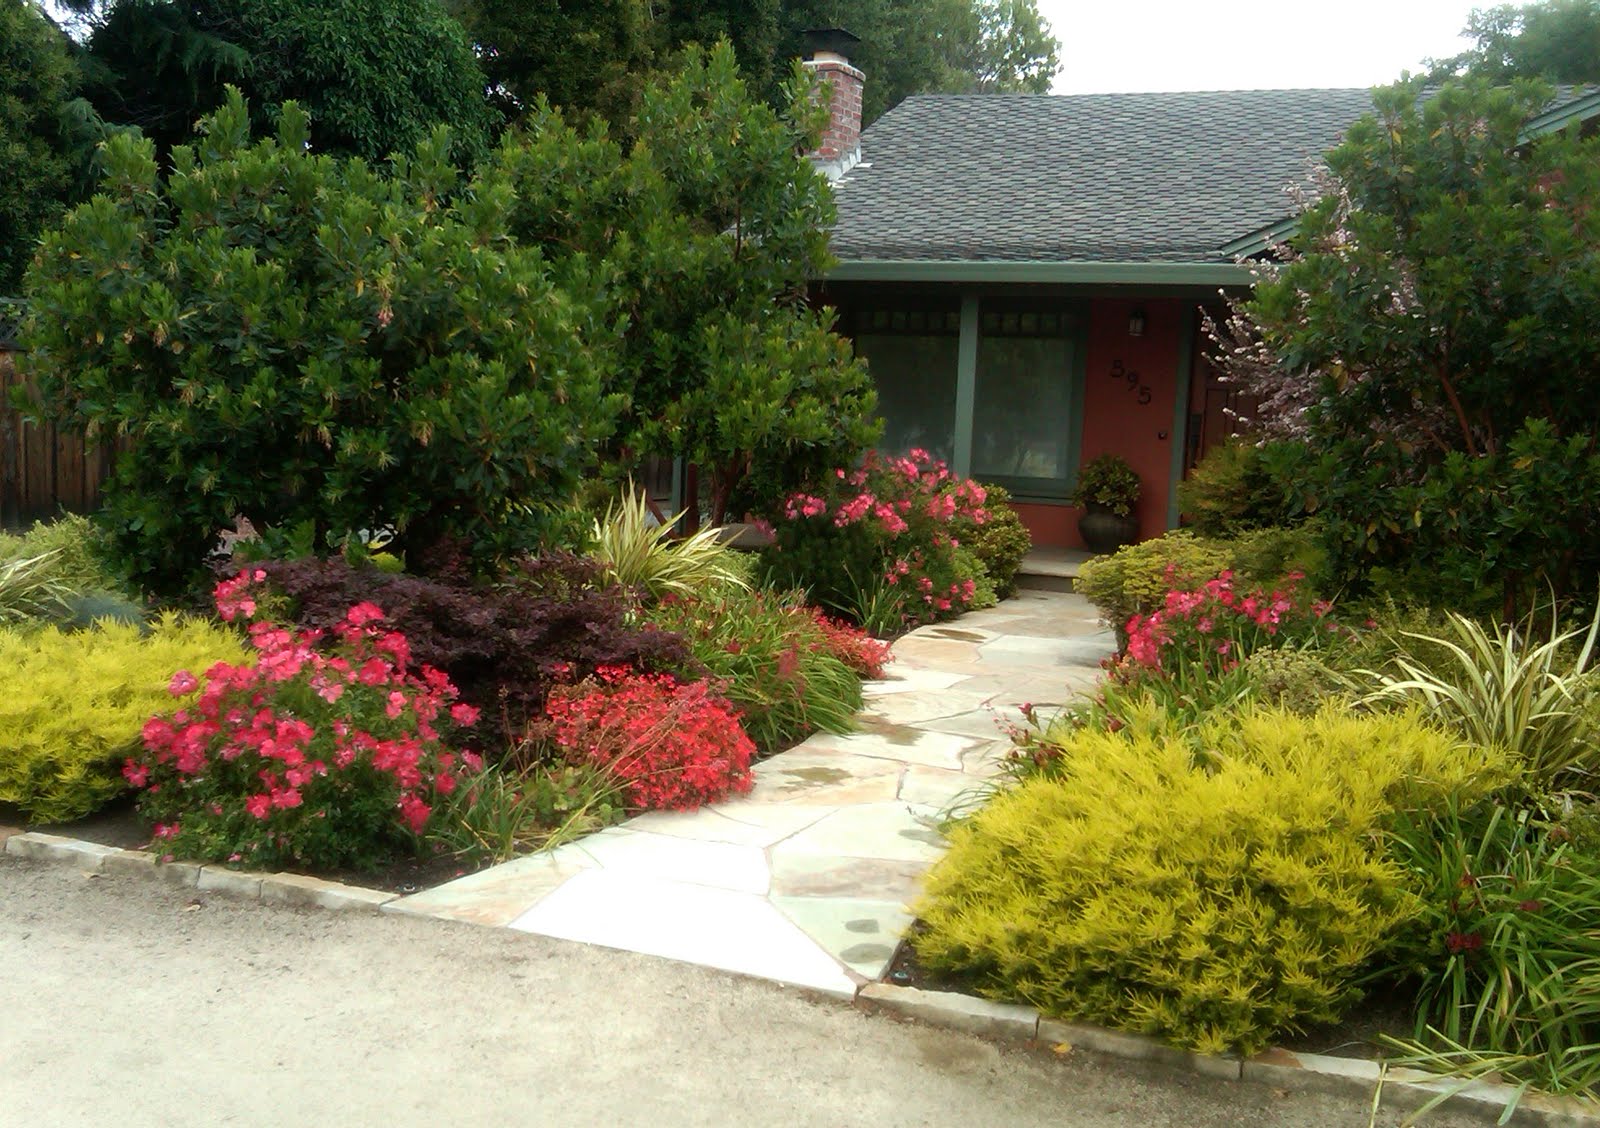 You could have a vibrant, colorful front garden that the whole 